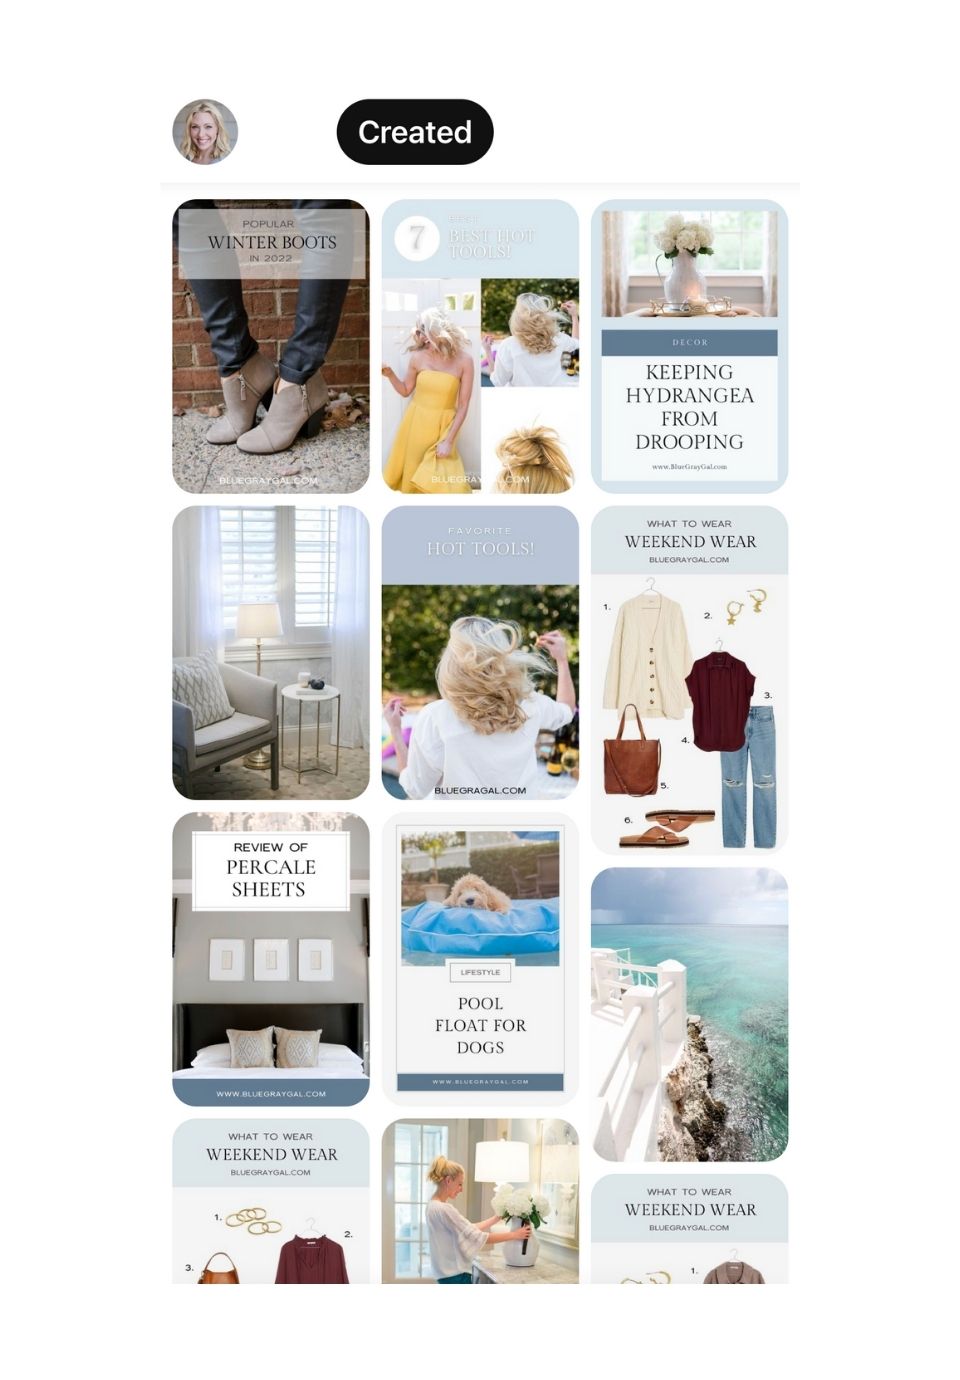 Home Decor influencer Kelly Page, BlueGrayGal on Pinterest.